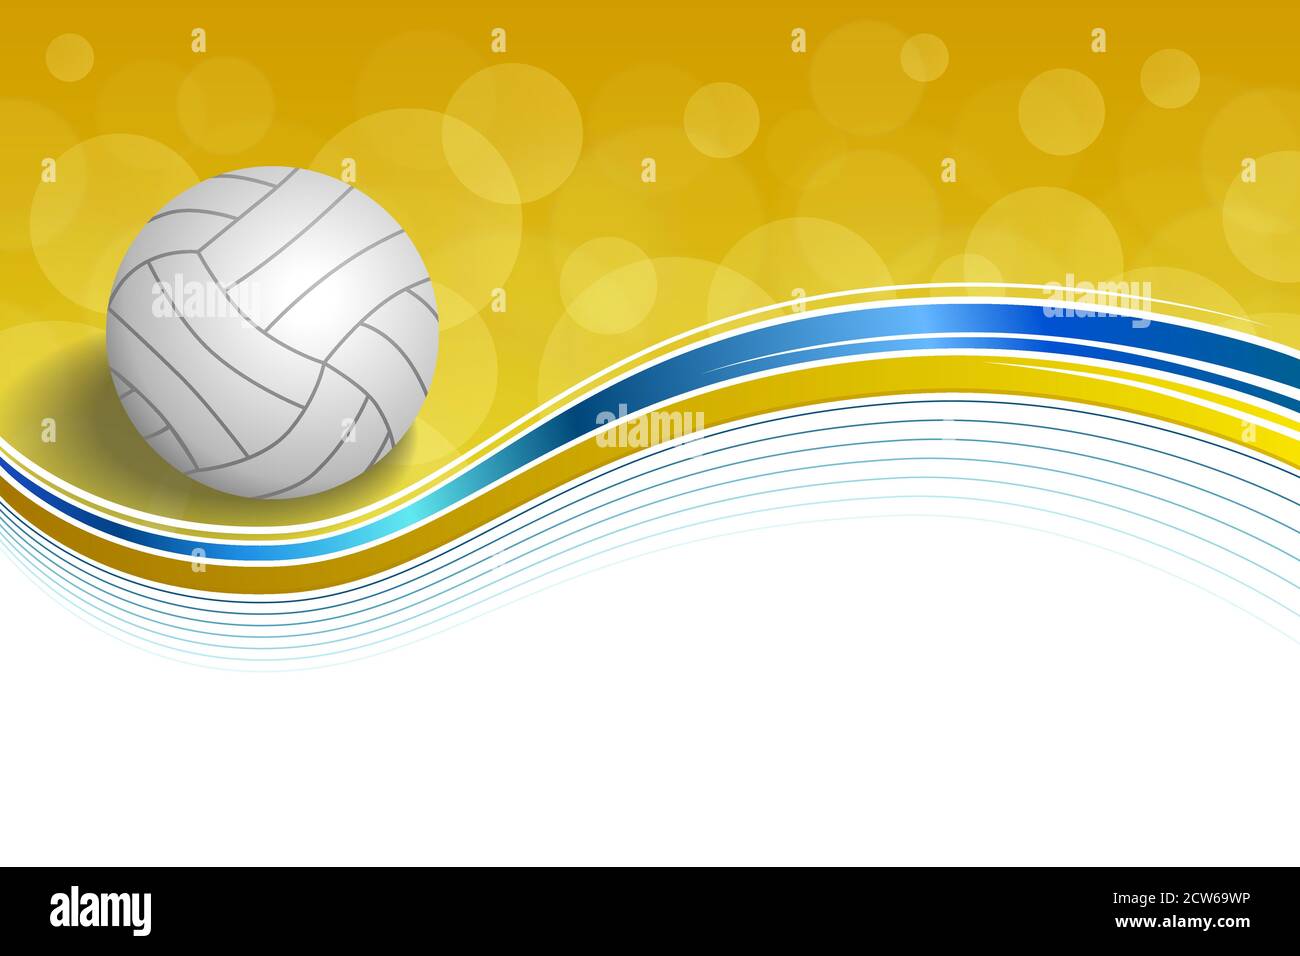 Background abstract sport volleyball blue yellow ball frame illustration vector Stock Vector